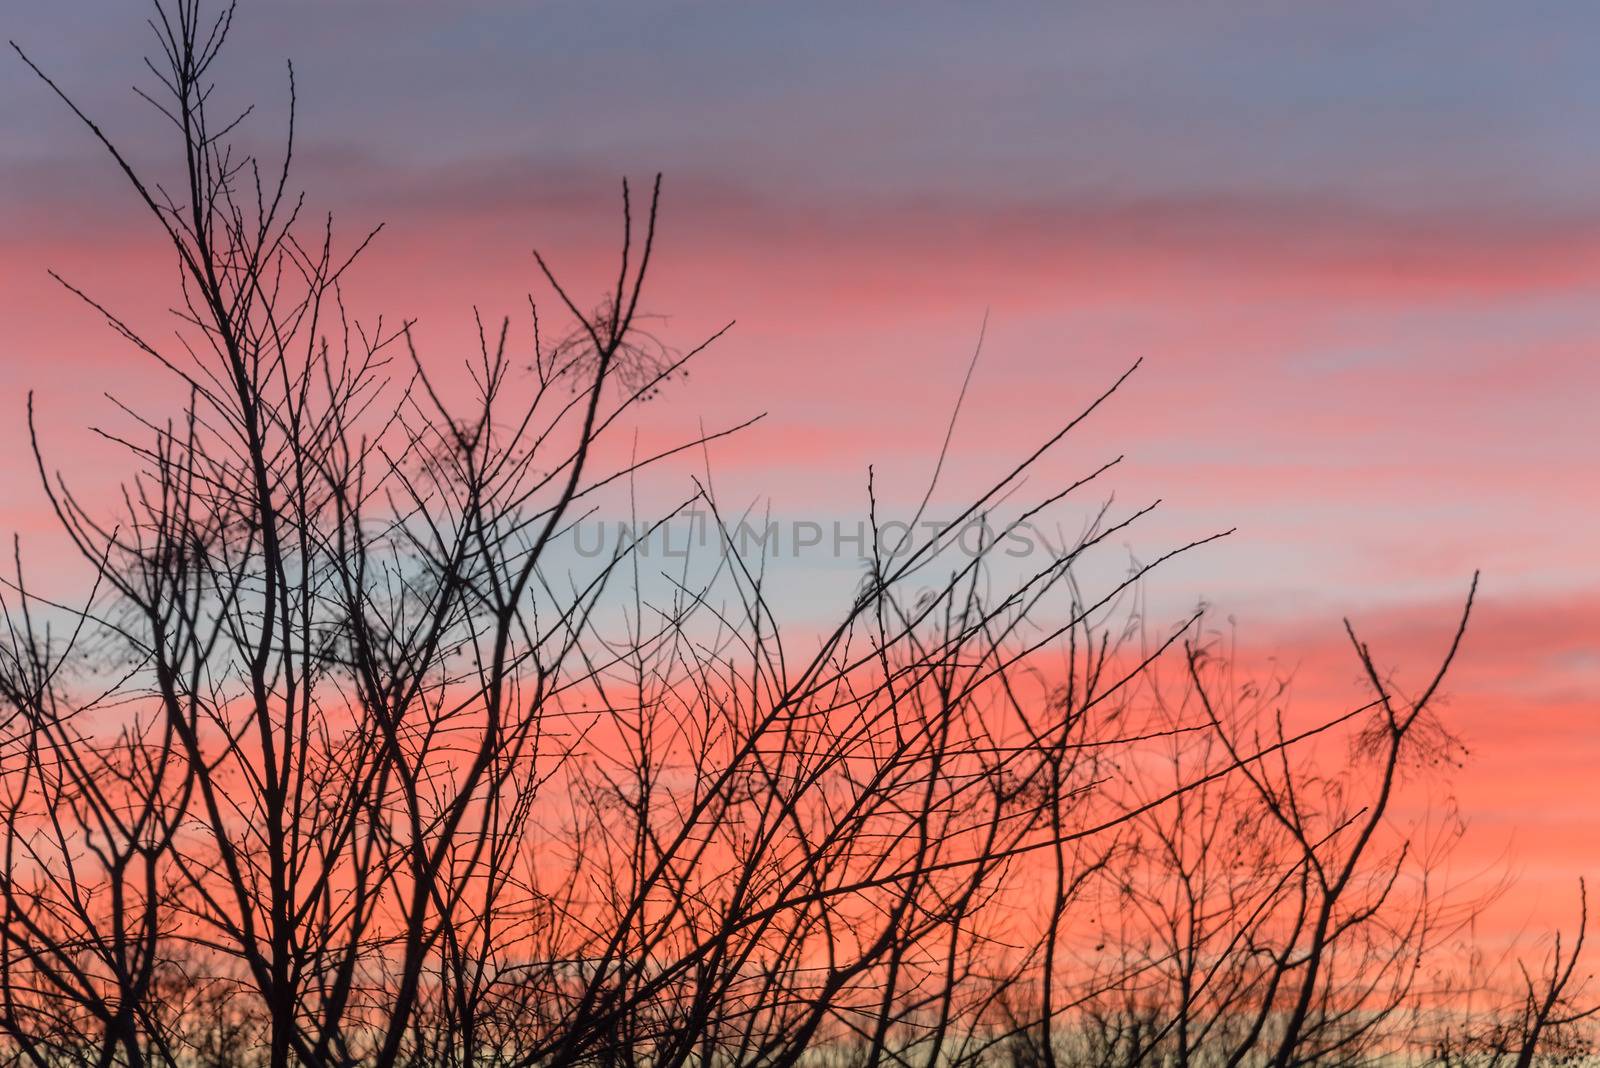 Silhouette of bare tree branches in winter time with beautiful sunrise clouds by trongnguyen